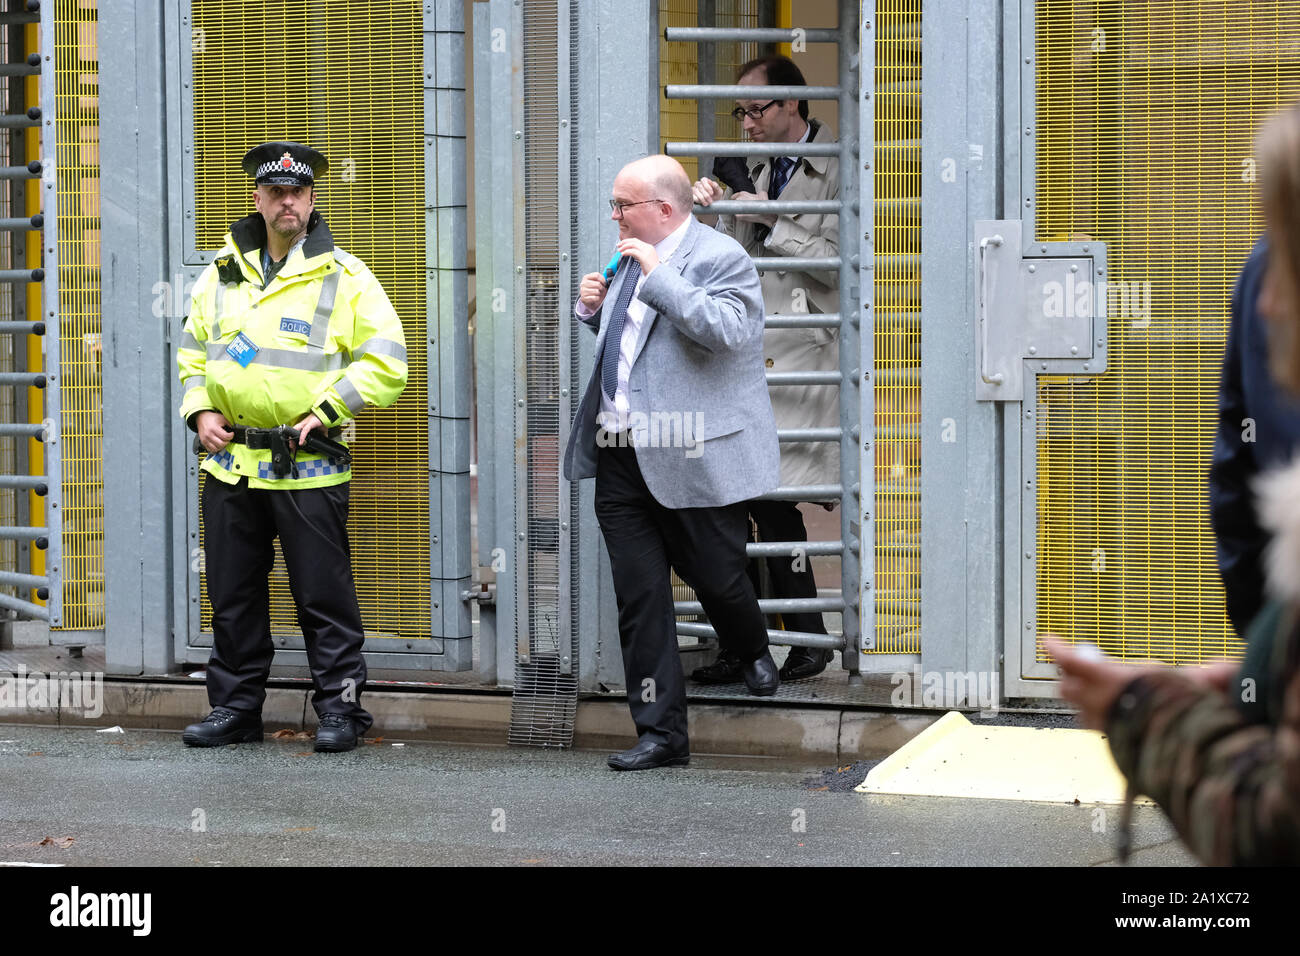 Manchester, UK.  Sunday 29th September 2019.  Delegates leave the inner secure zone outside the Conservative Party Conference on the opening day of the Tory event.  Photo Steven May / Alamy Live News Stock Photo